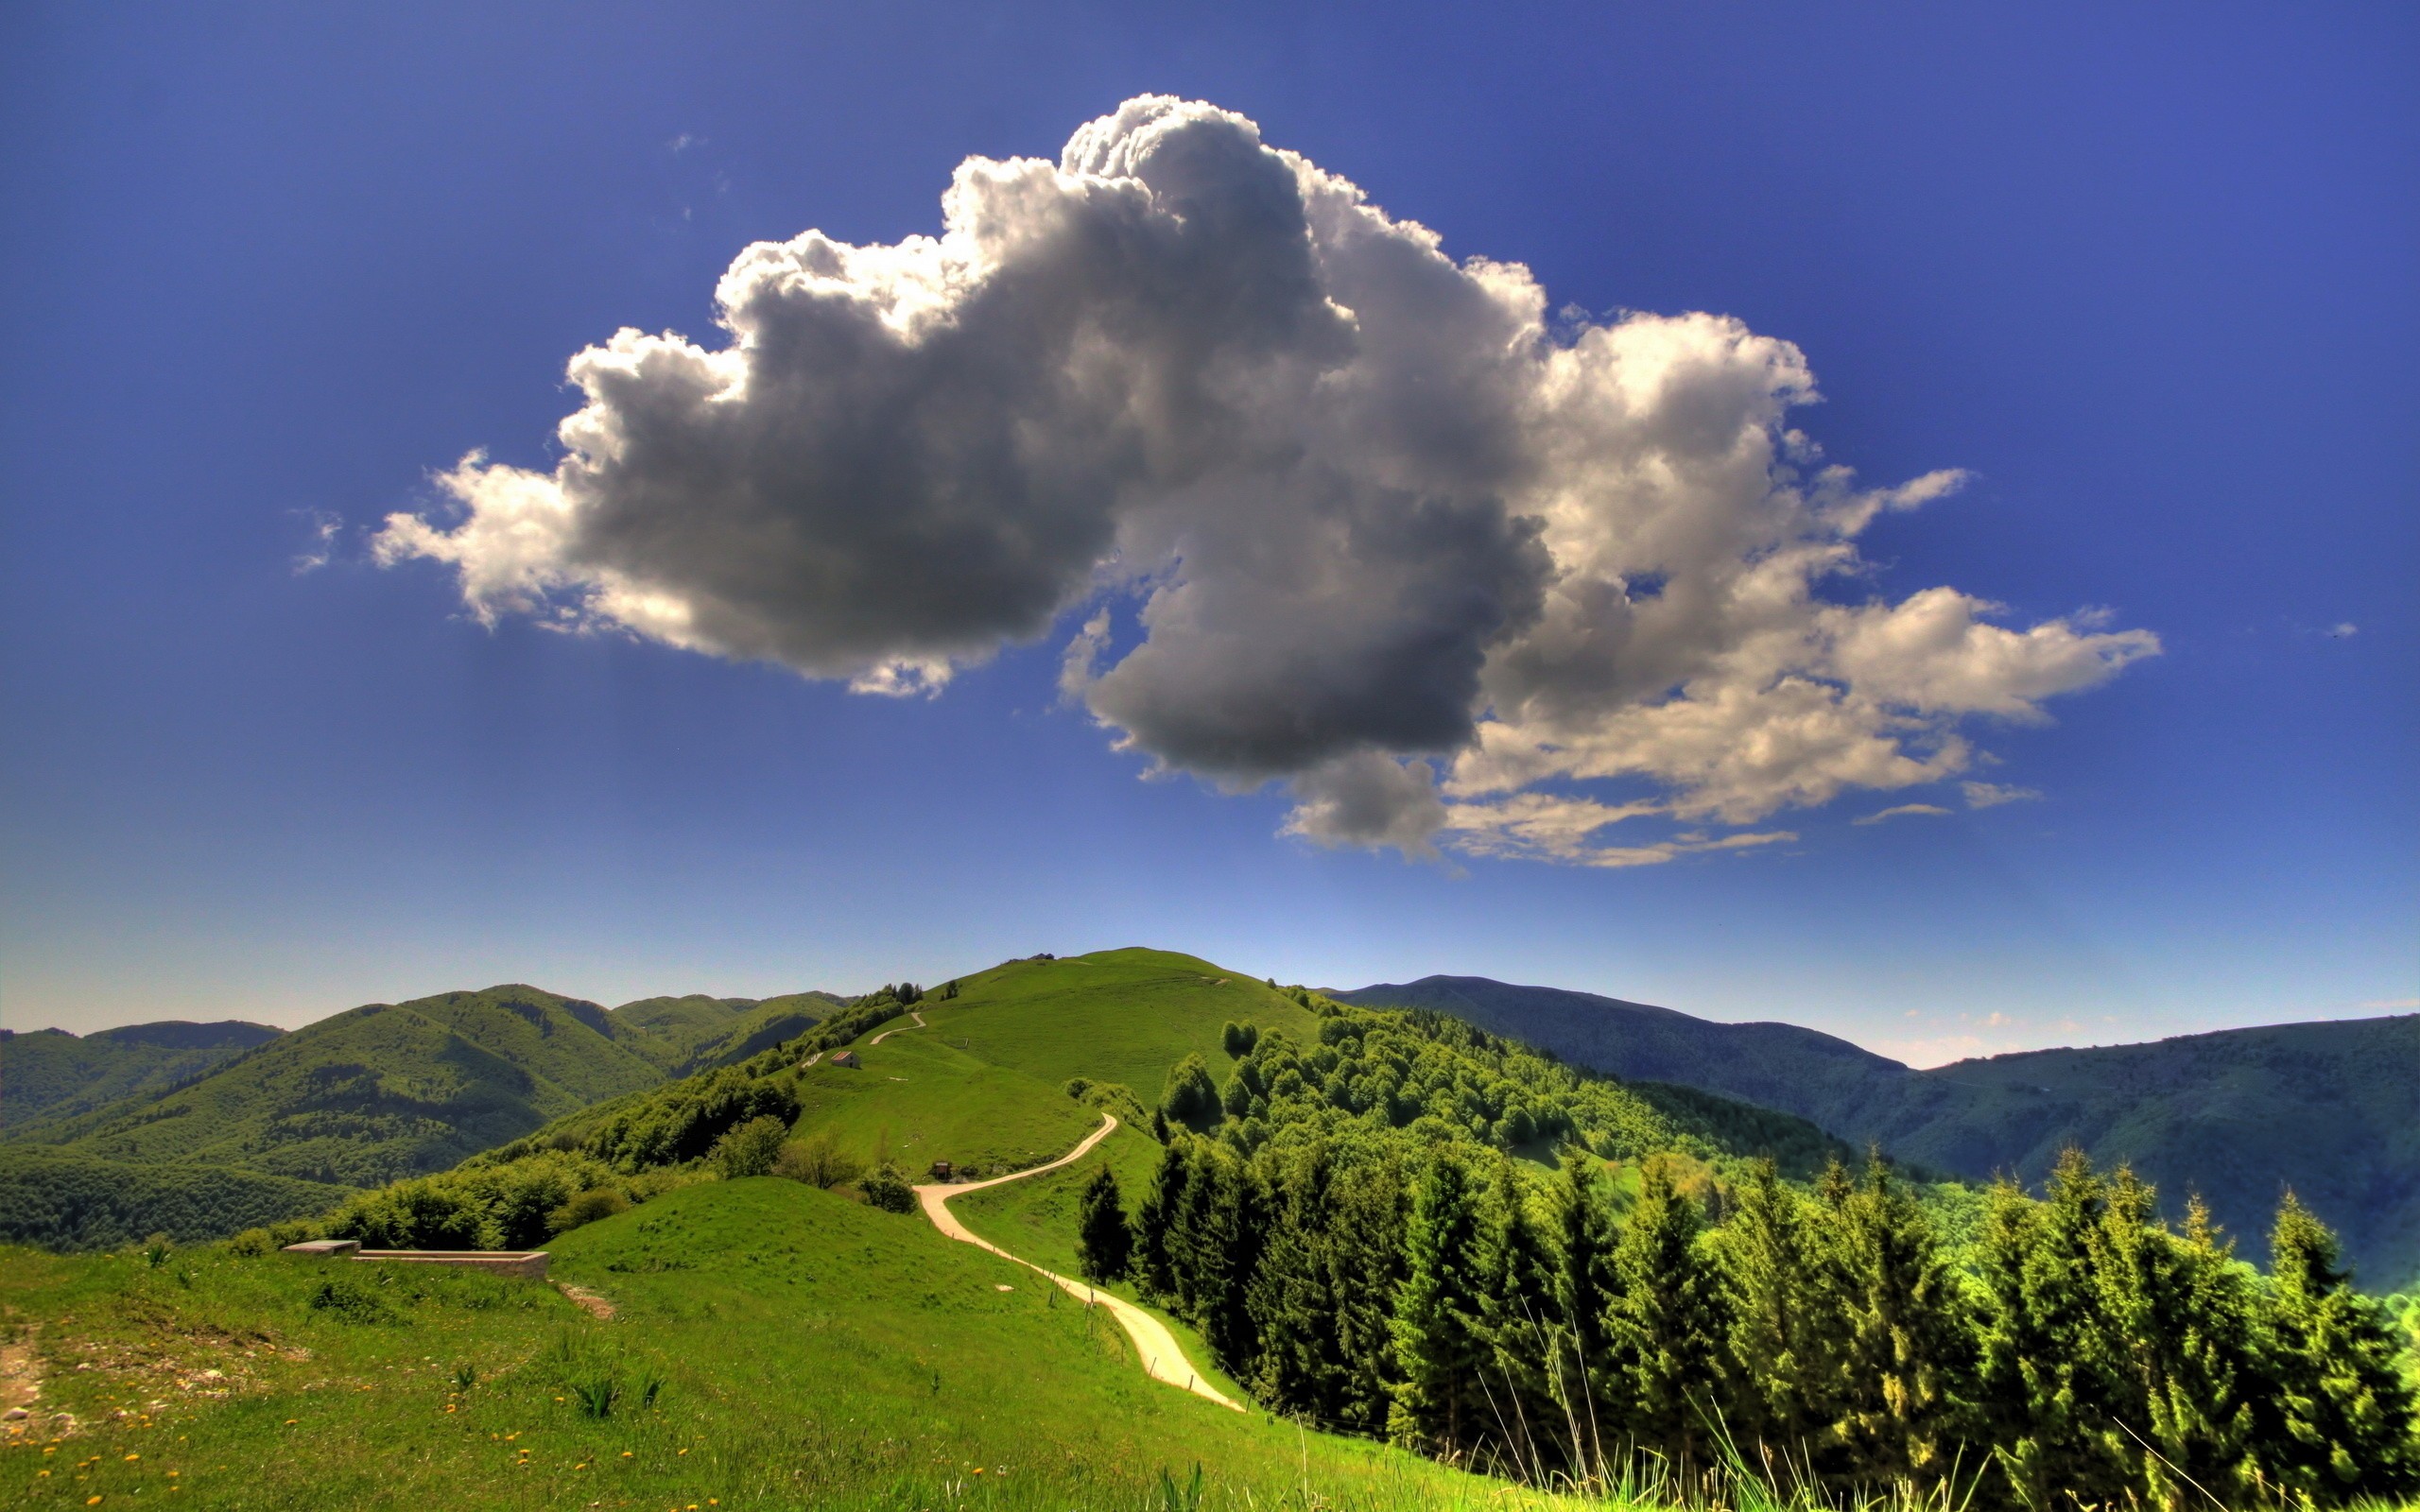 General 2560x1600 nature landscape mountains clouds trees